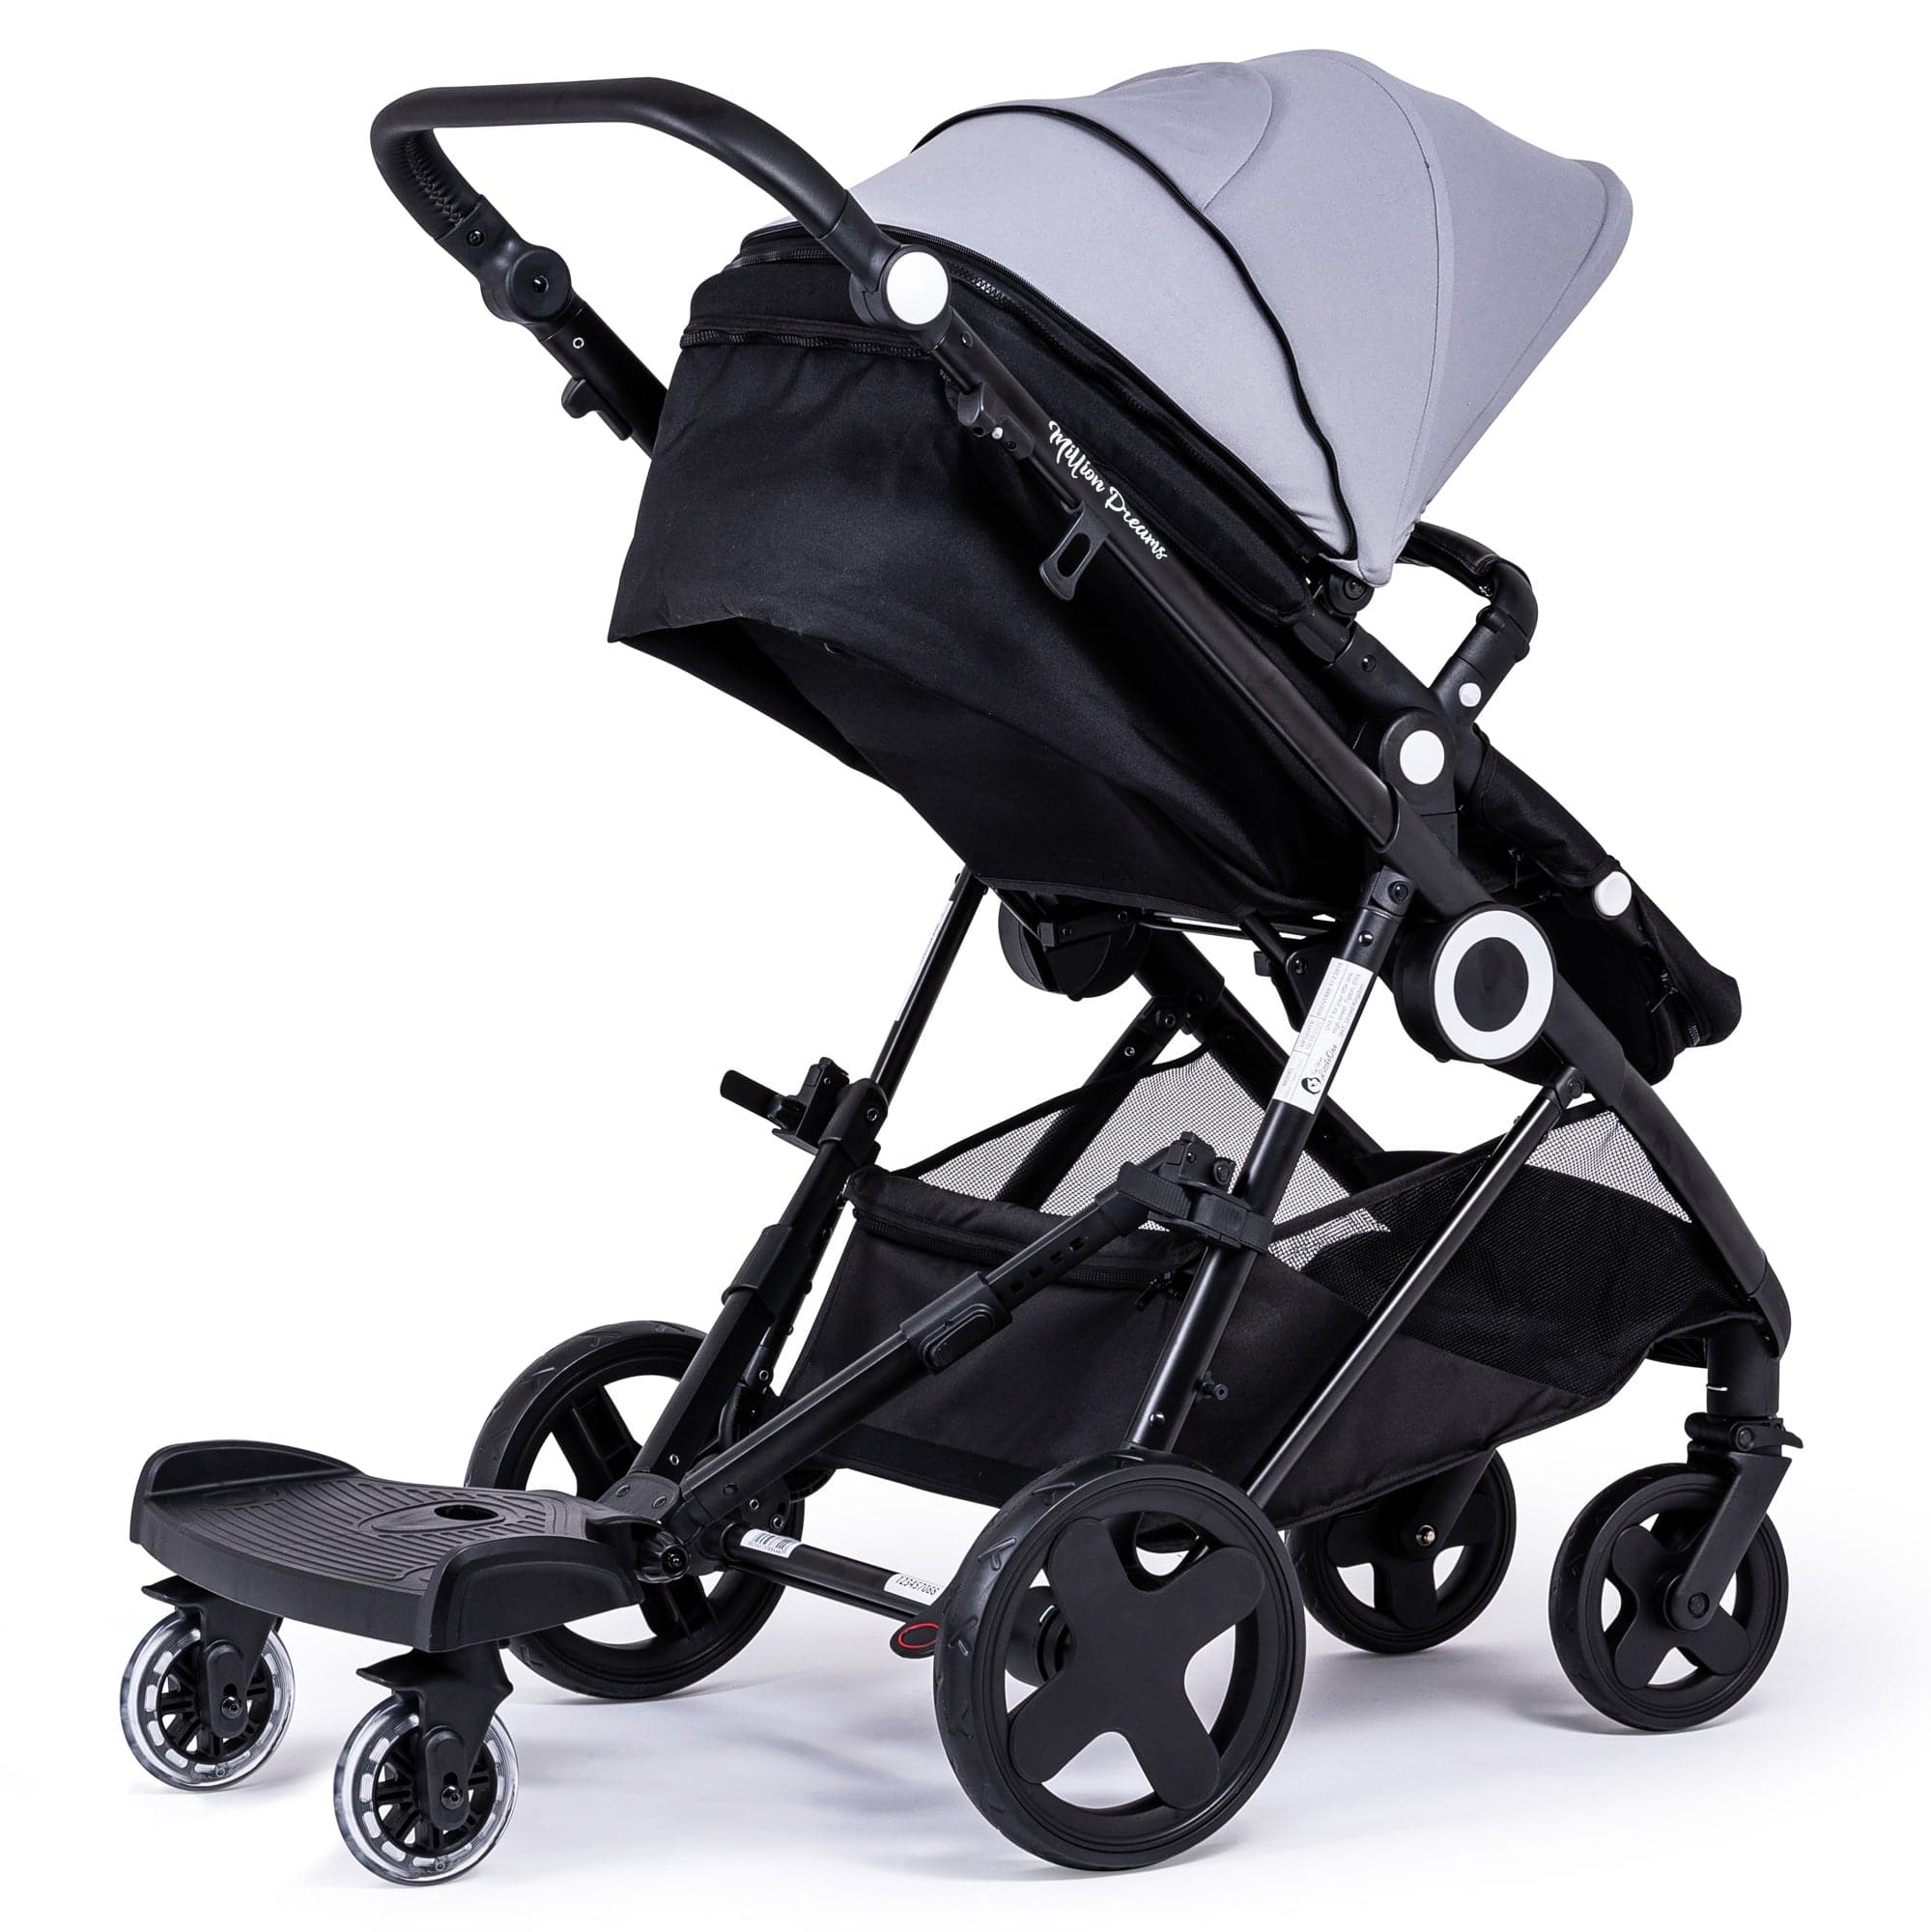 Ride On Board with Seat Compatible with Babybus - For Your Little One